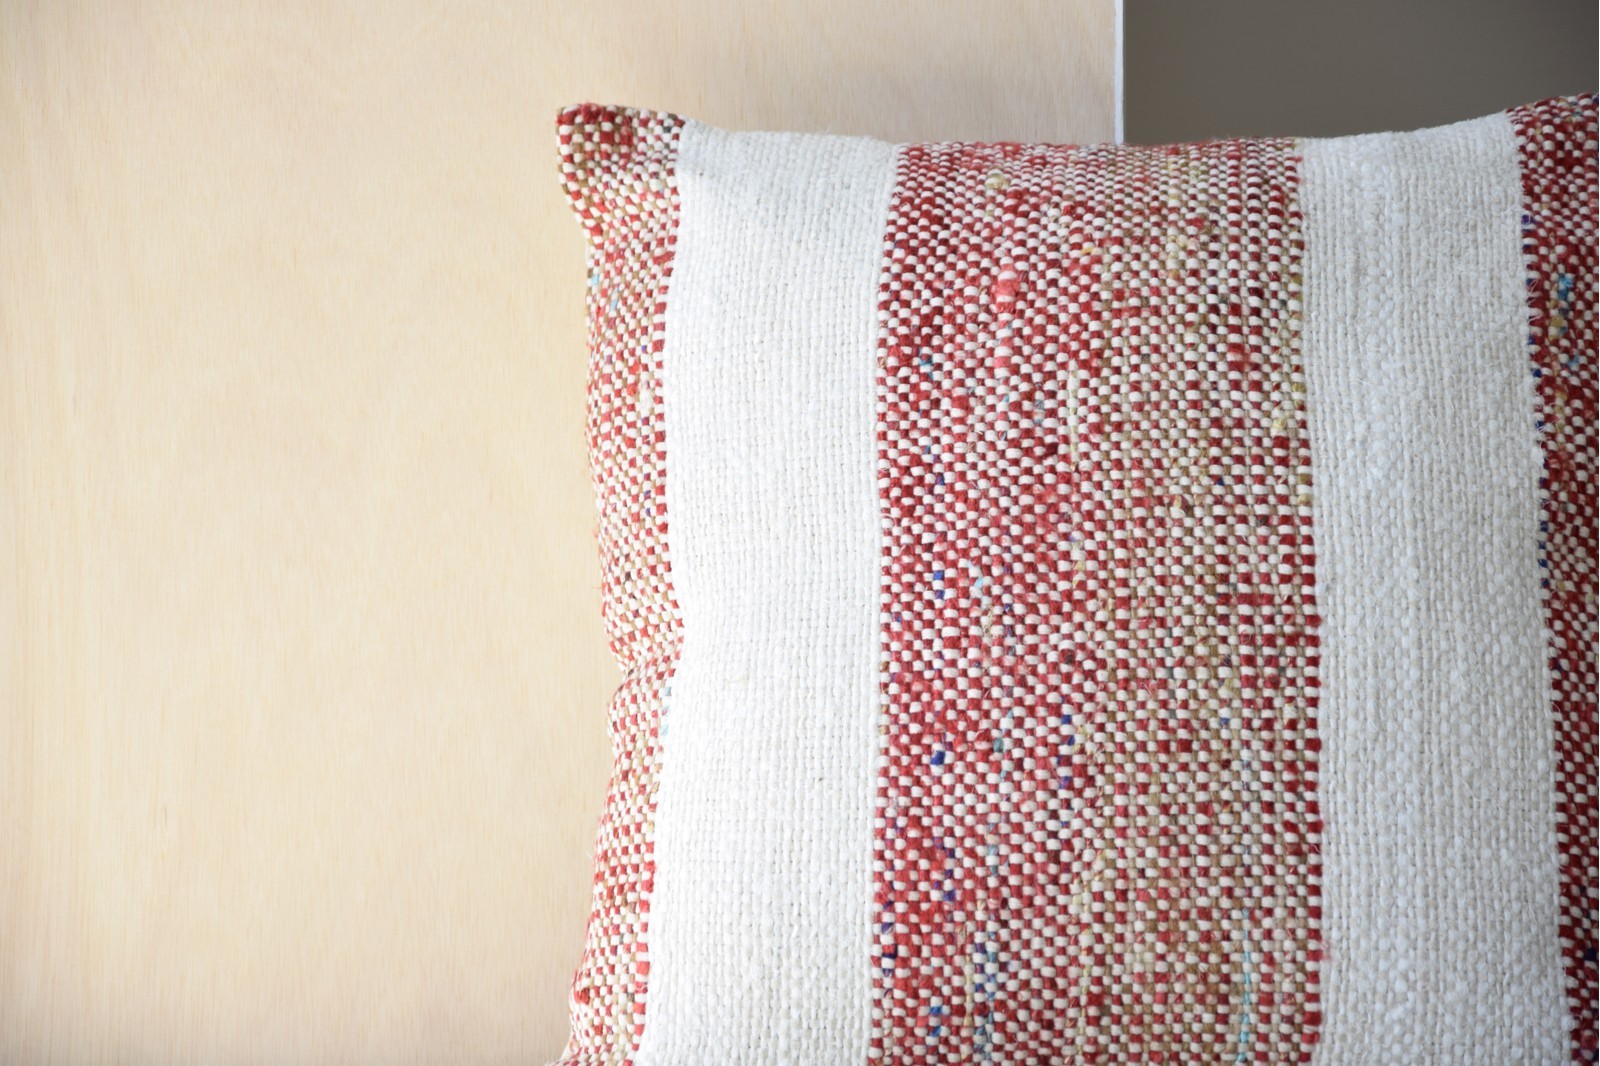 CUSHION MARA N.2. RED AND WHITE COLOR